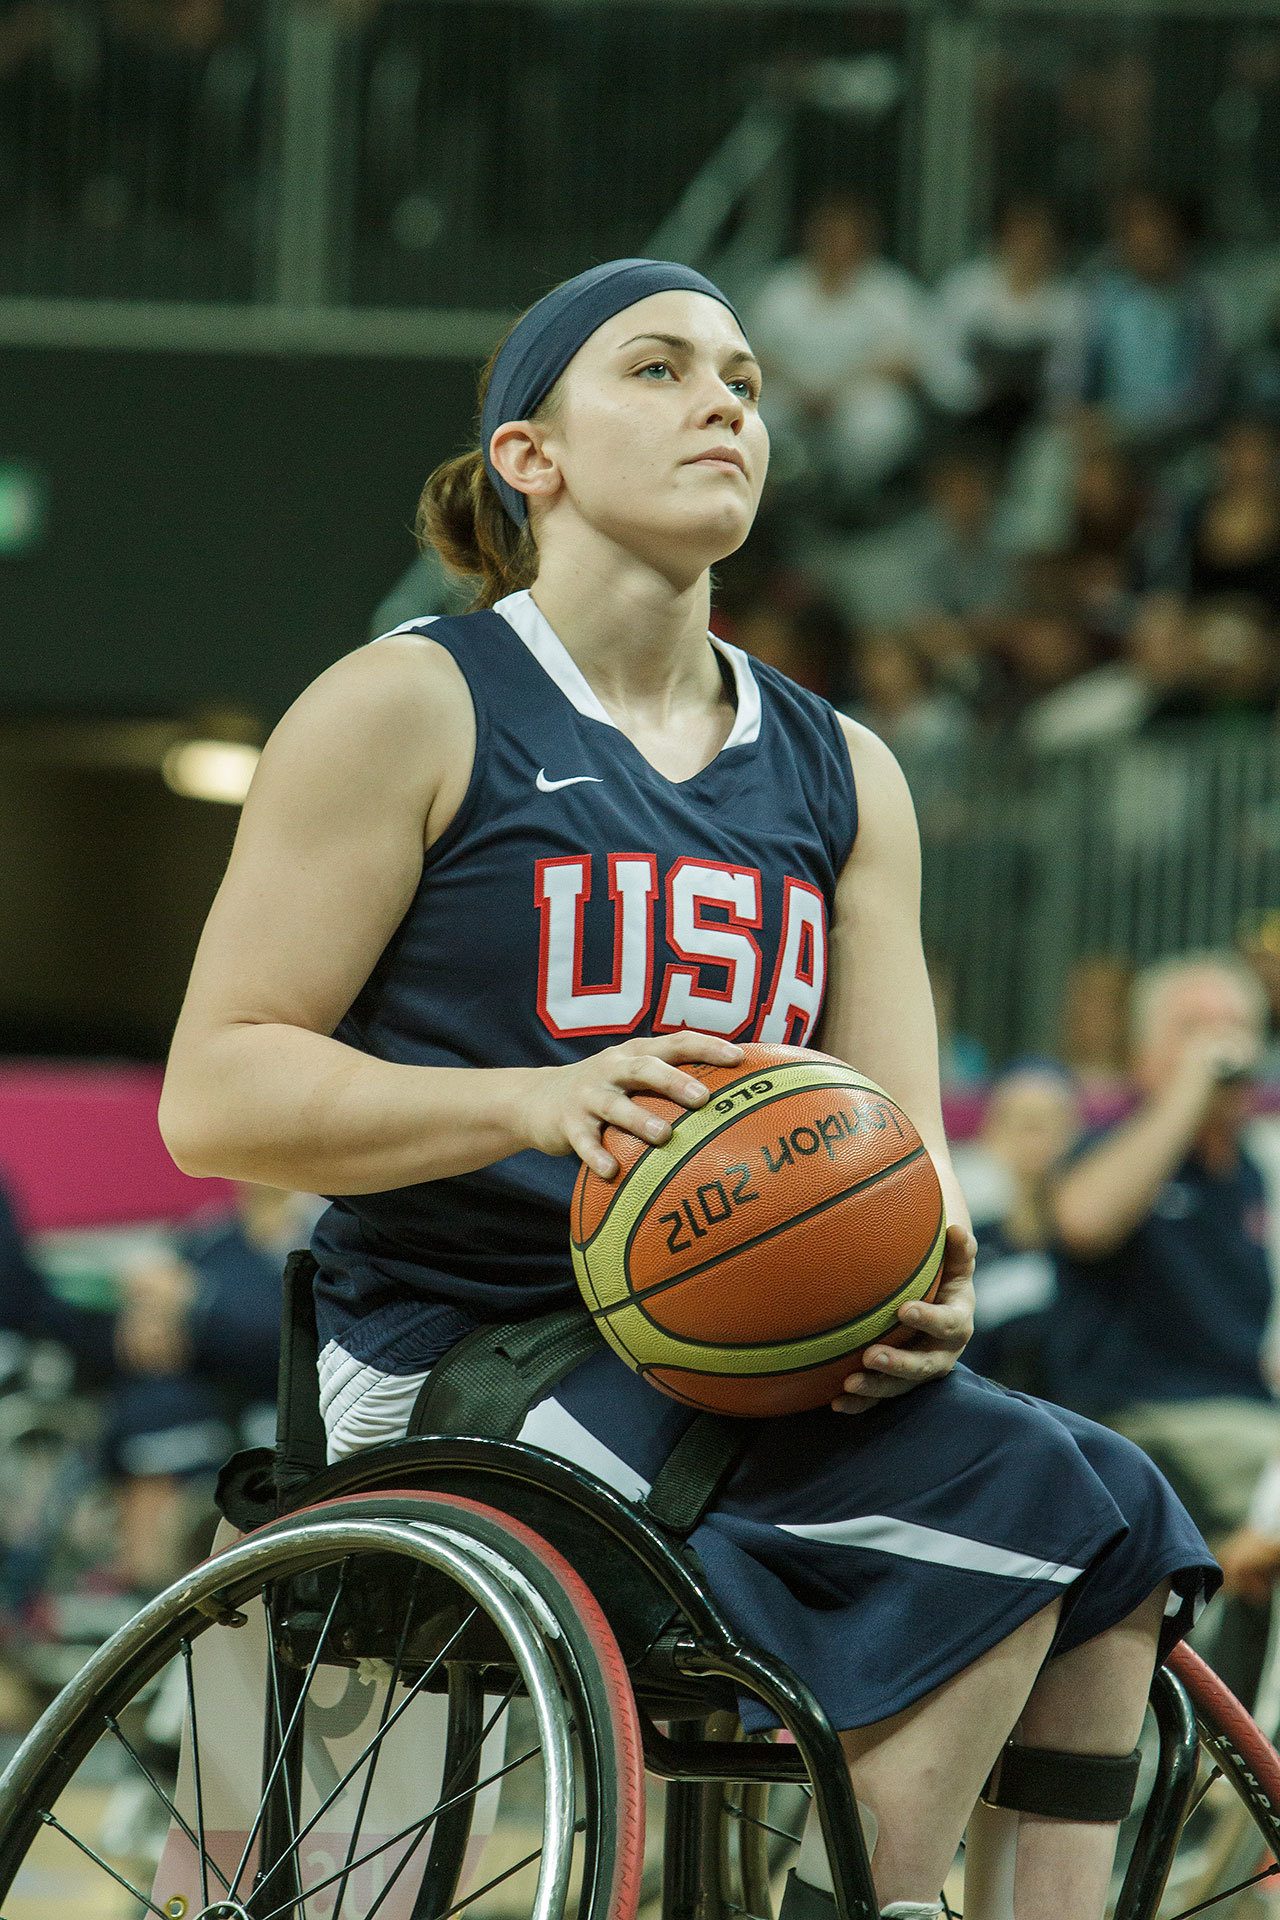 Desiree Miller, a graduate of Monroe High School, is a member of the U.S. women’s wheelchair basketball team that will play in the 2016 Paralympics in Rio de Janeiro in September. (Joe Kusumoto photo)